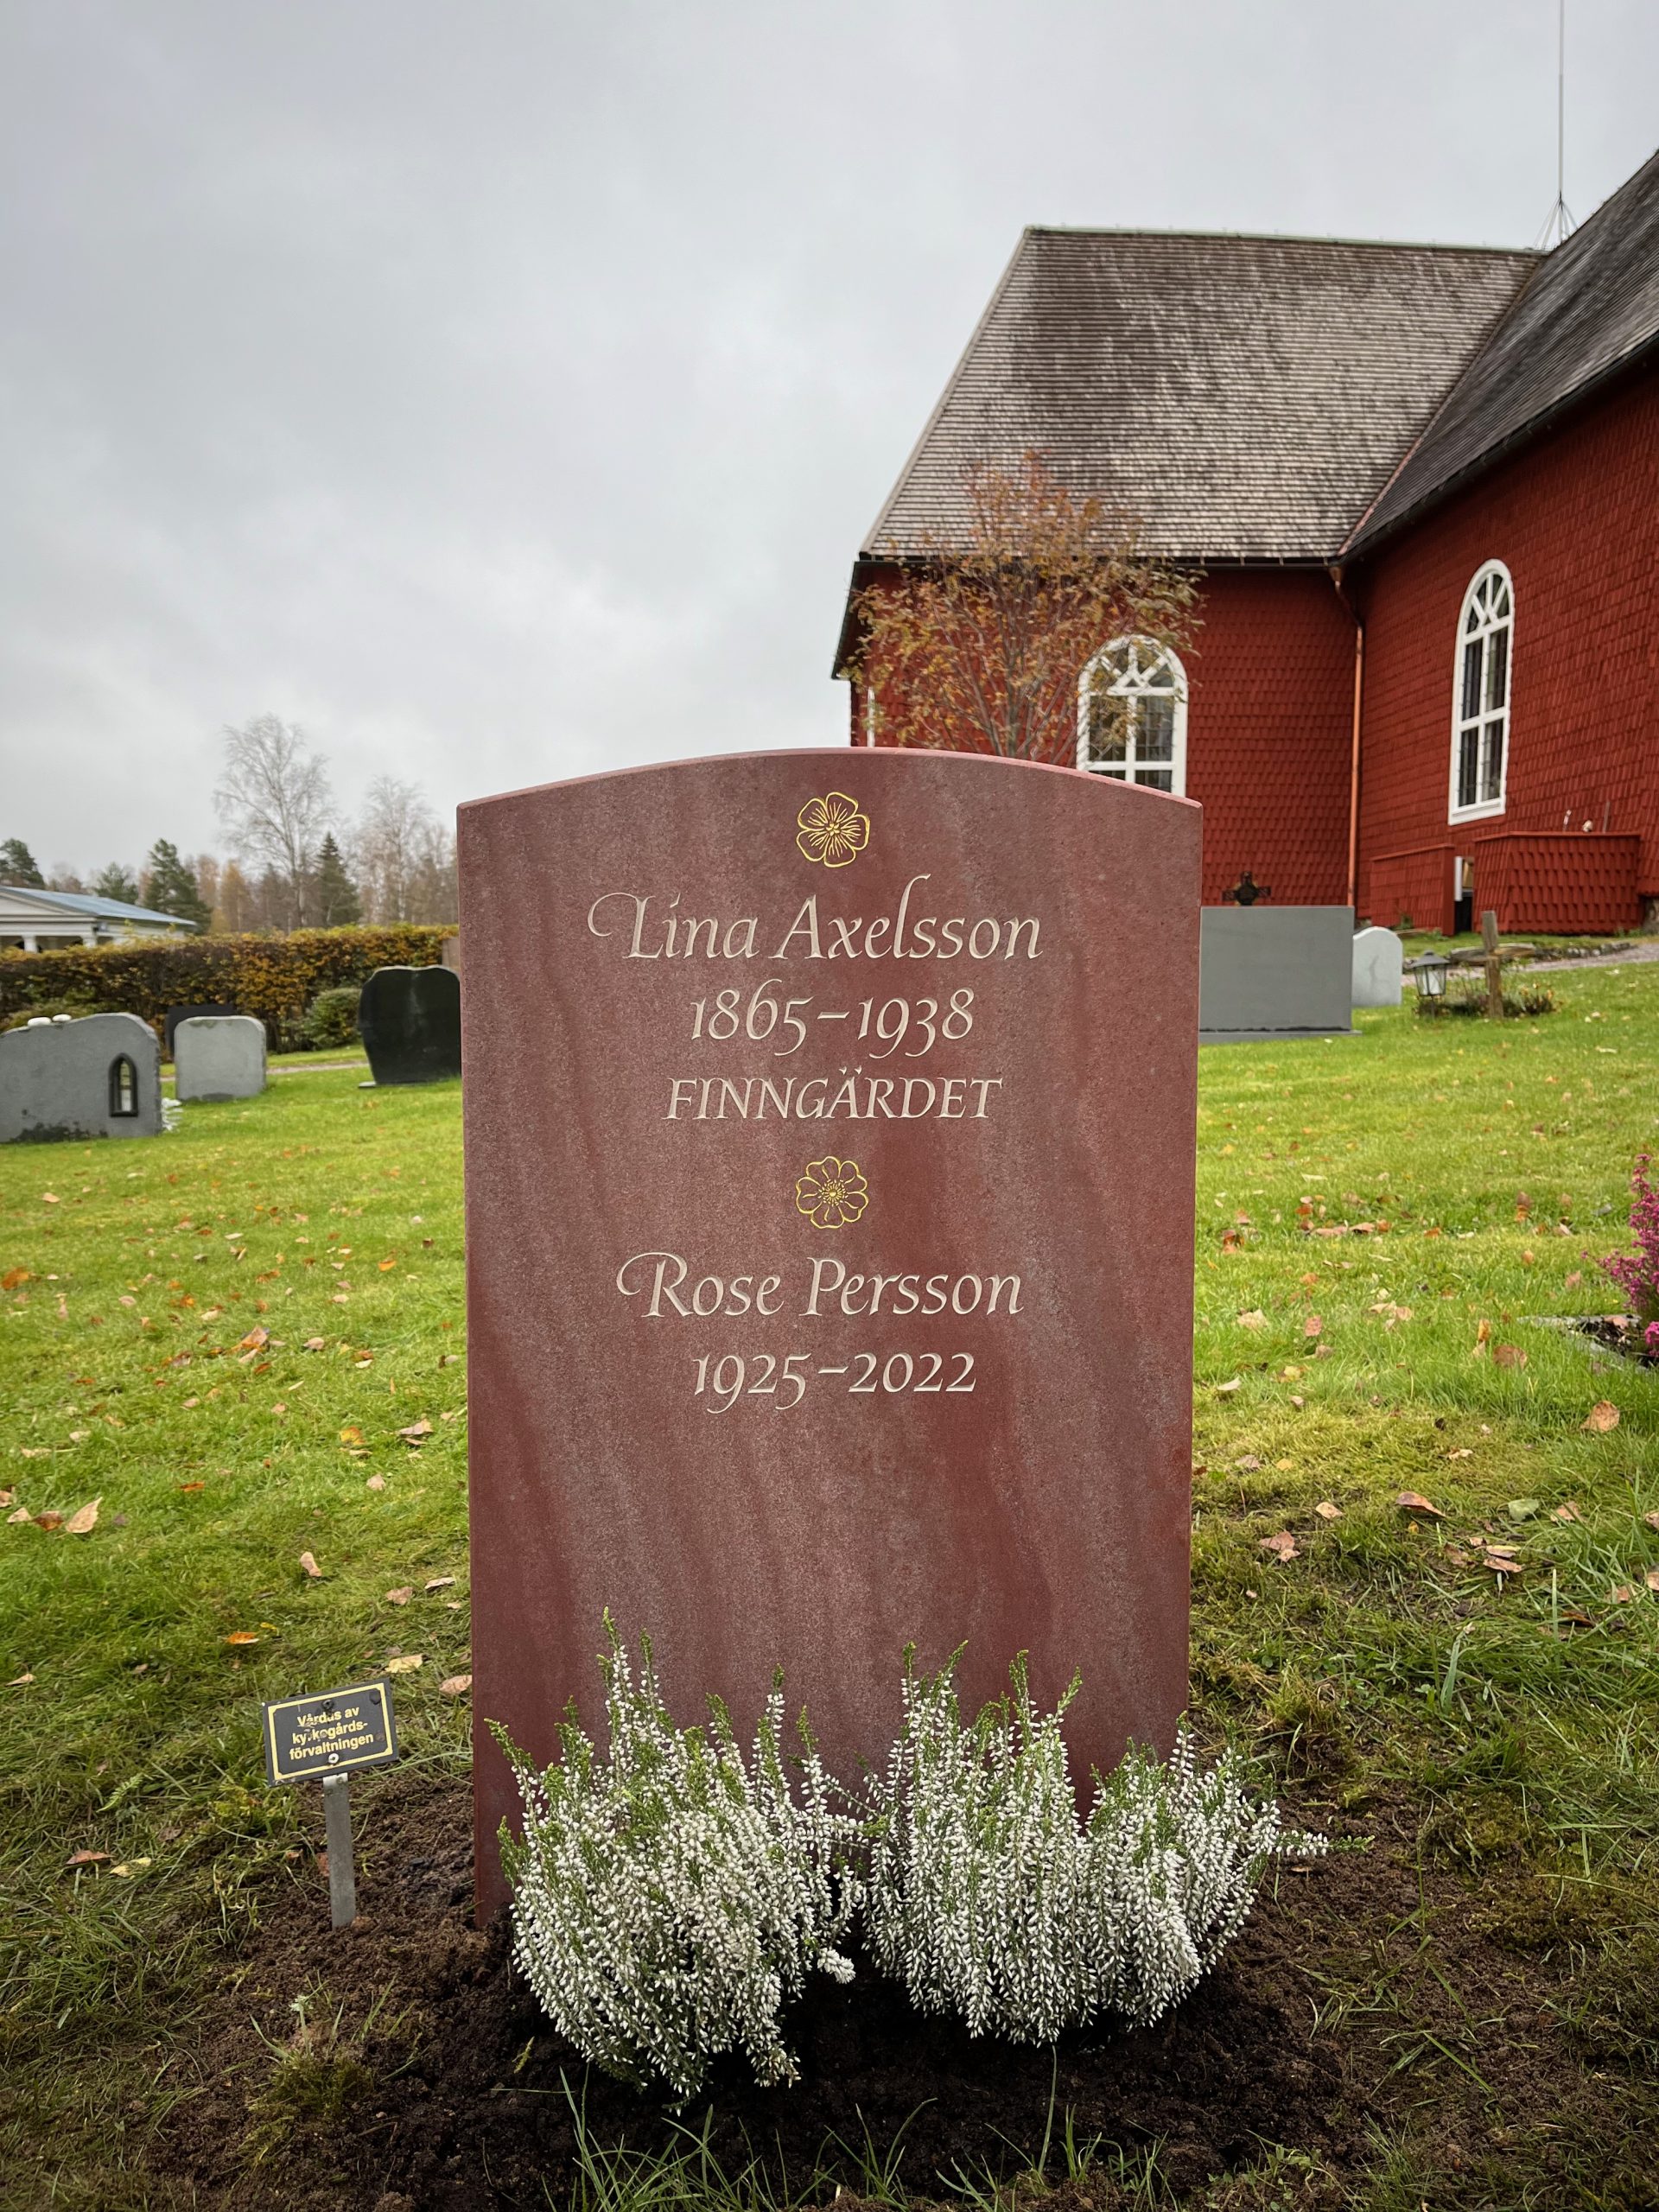 Headstone in red quartzite from Älvdalen, v-cut and painted.